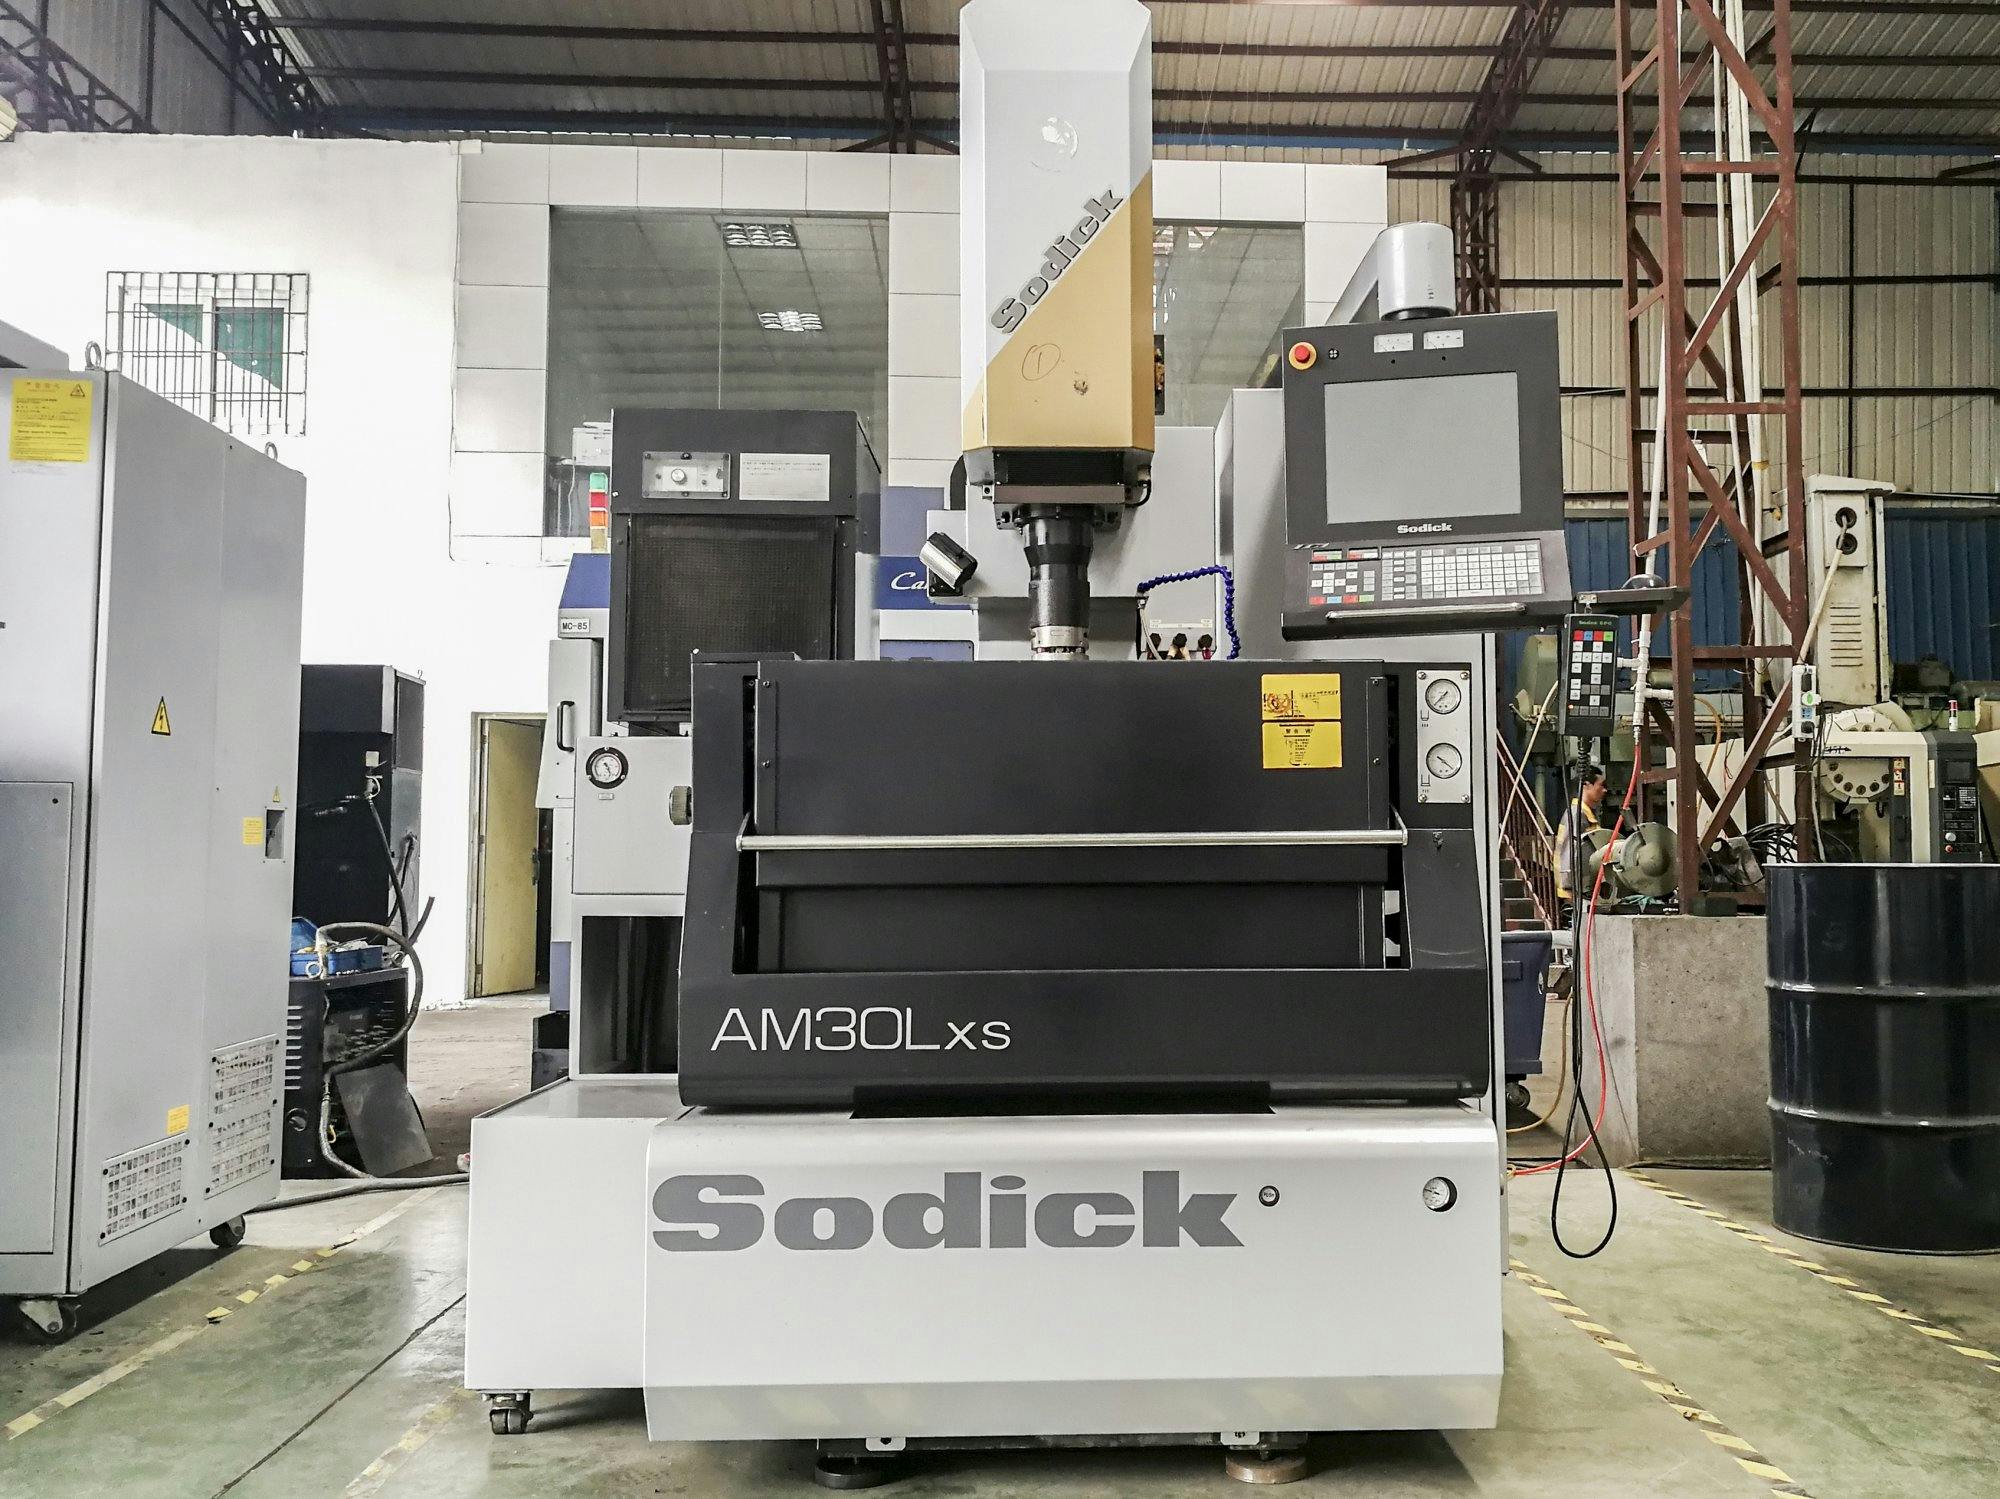 Front view of Sodick AM30LXS Machine